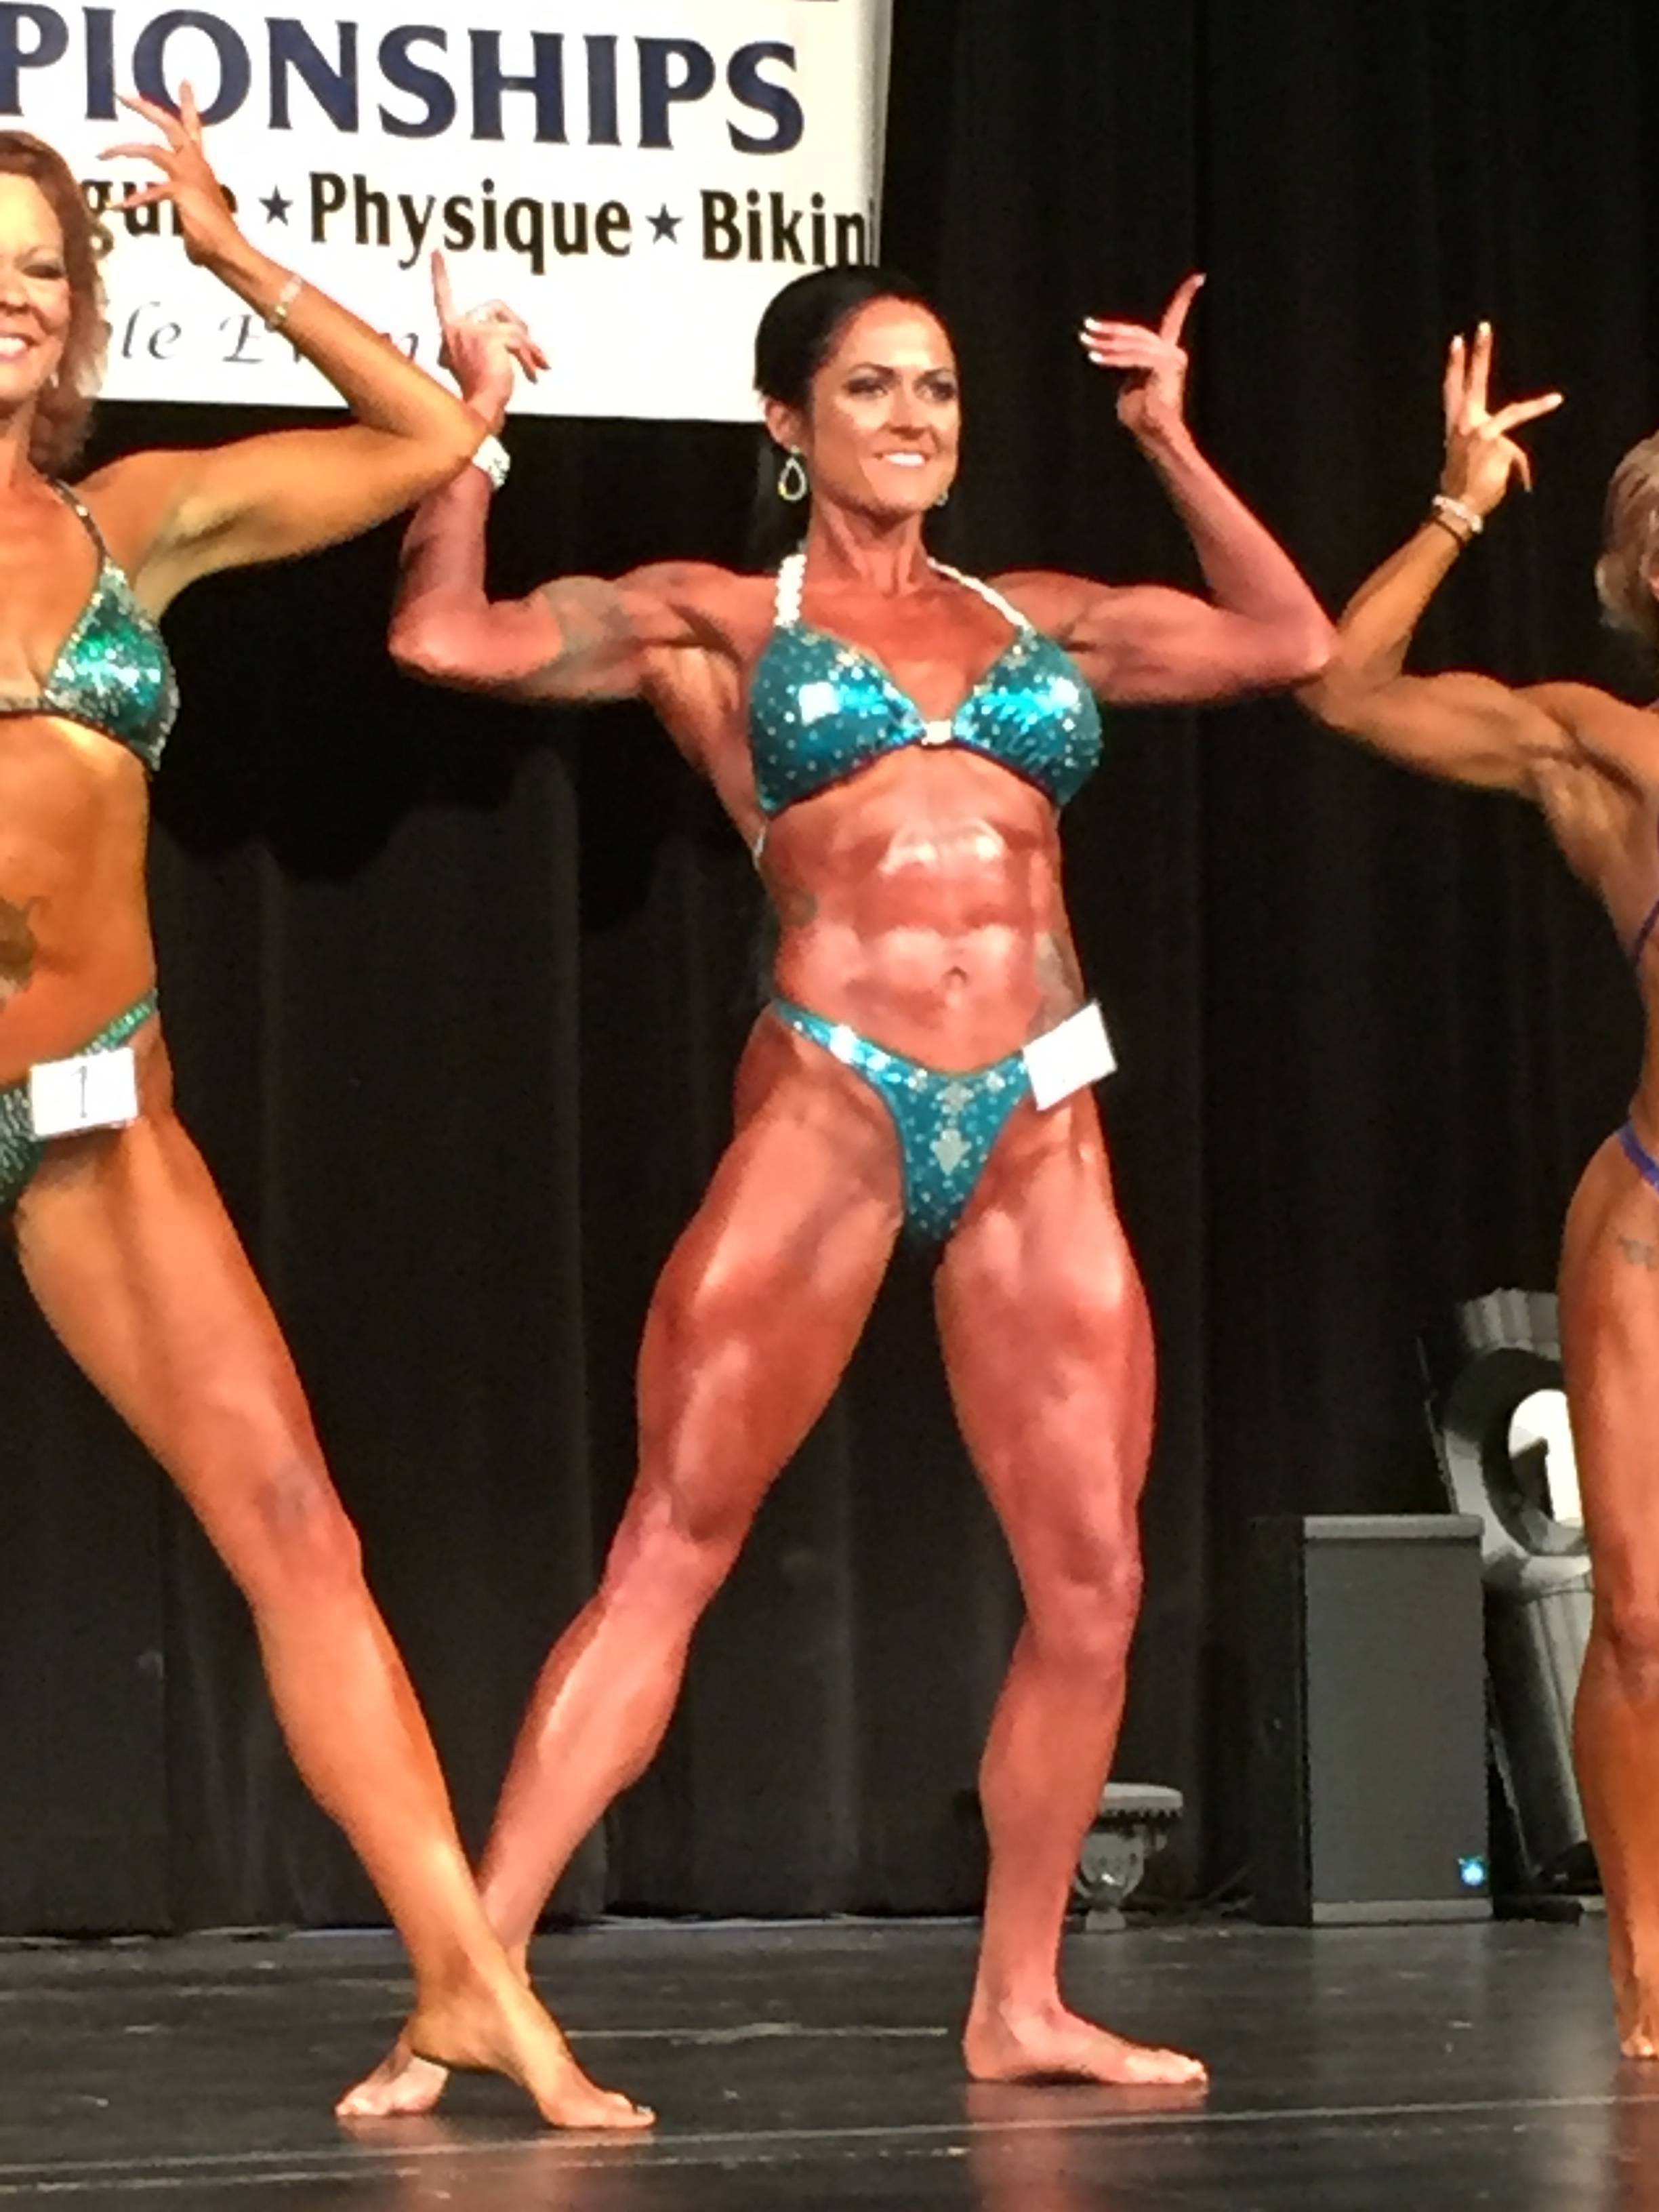 Face of Defense: Marine, Mother Wins at First Bodybuilding